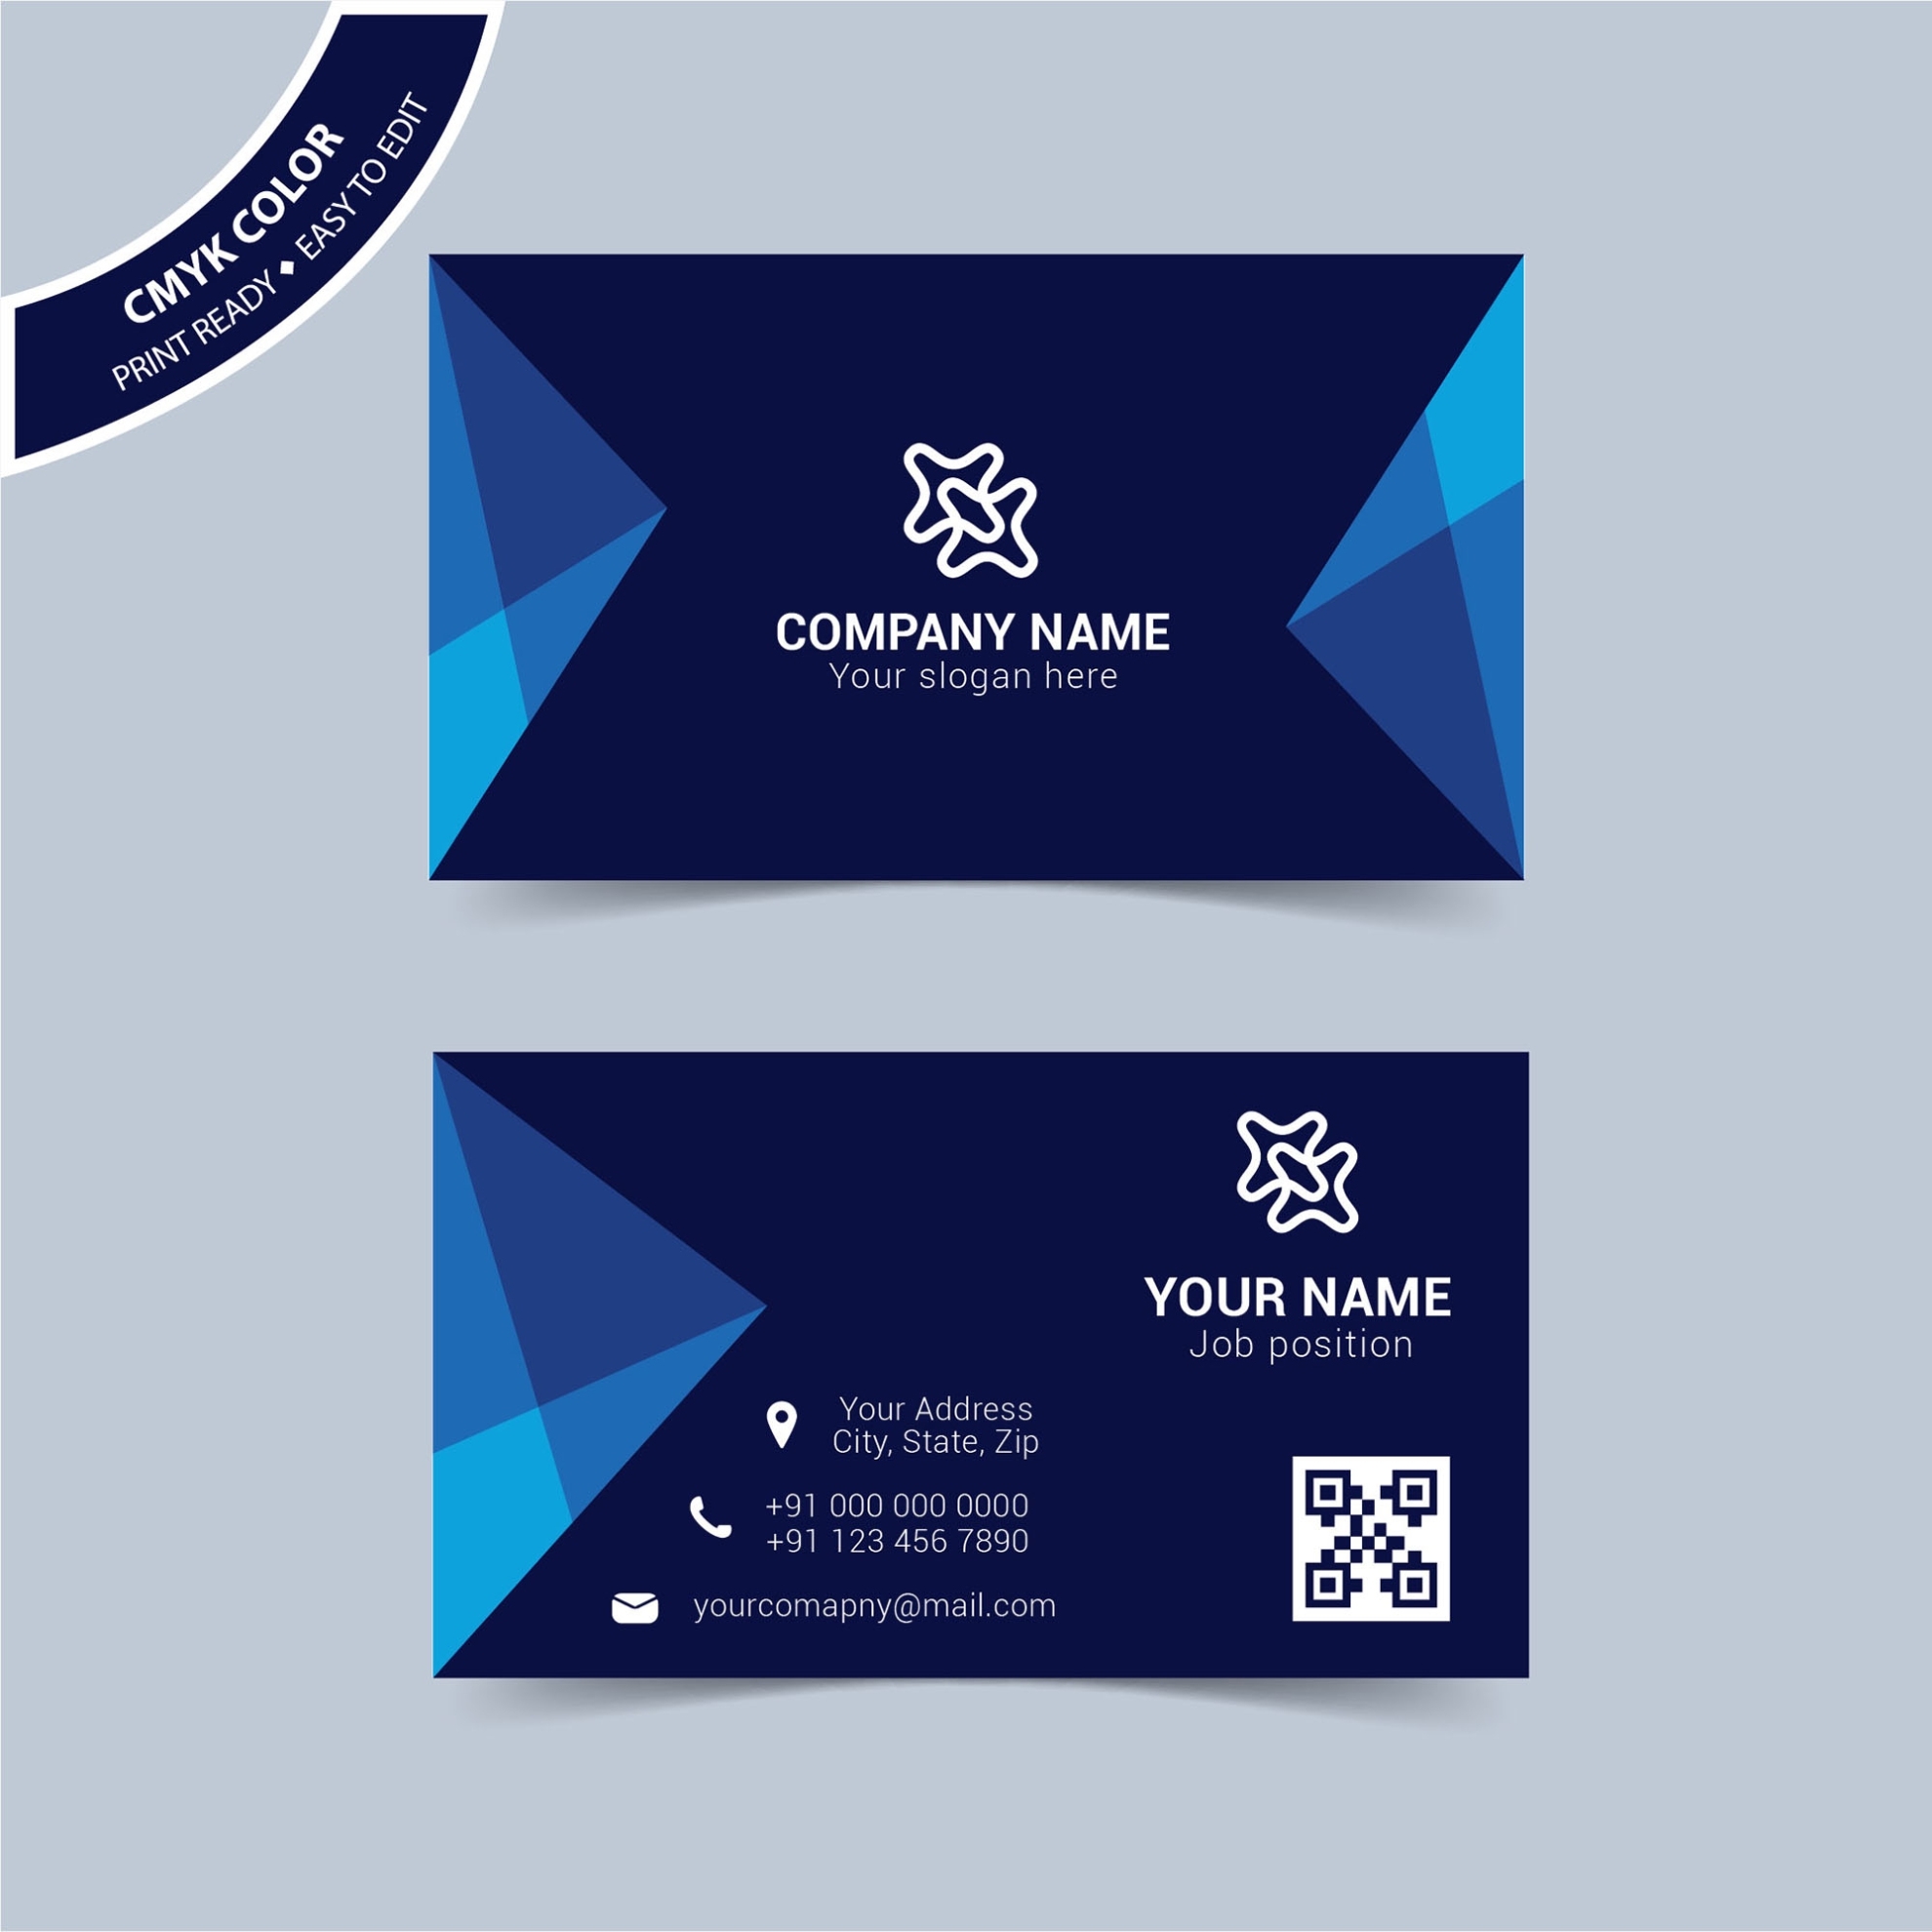 Modern Blue Business Card Template Free Download – Wisxi In Templates For Visiting Cards Free Downloads